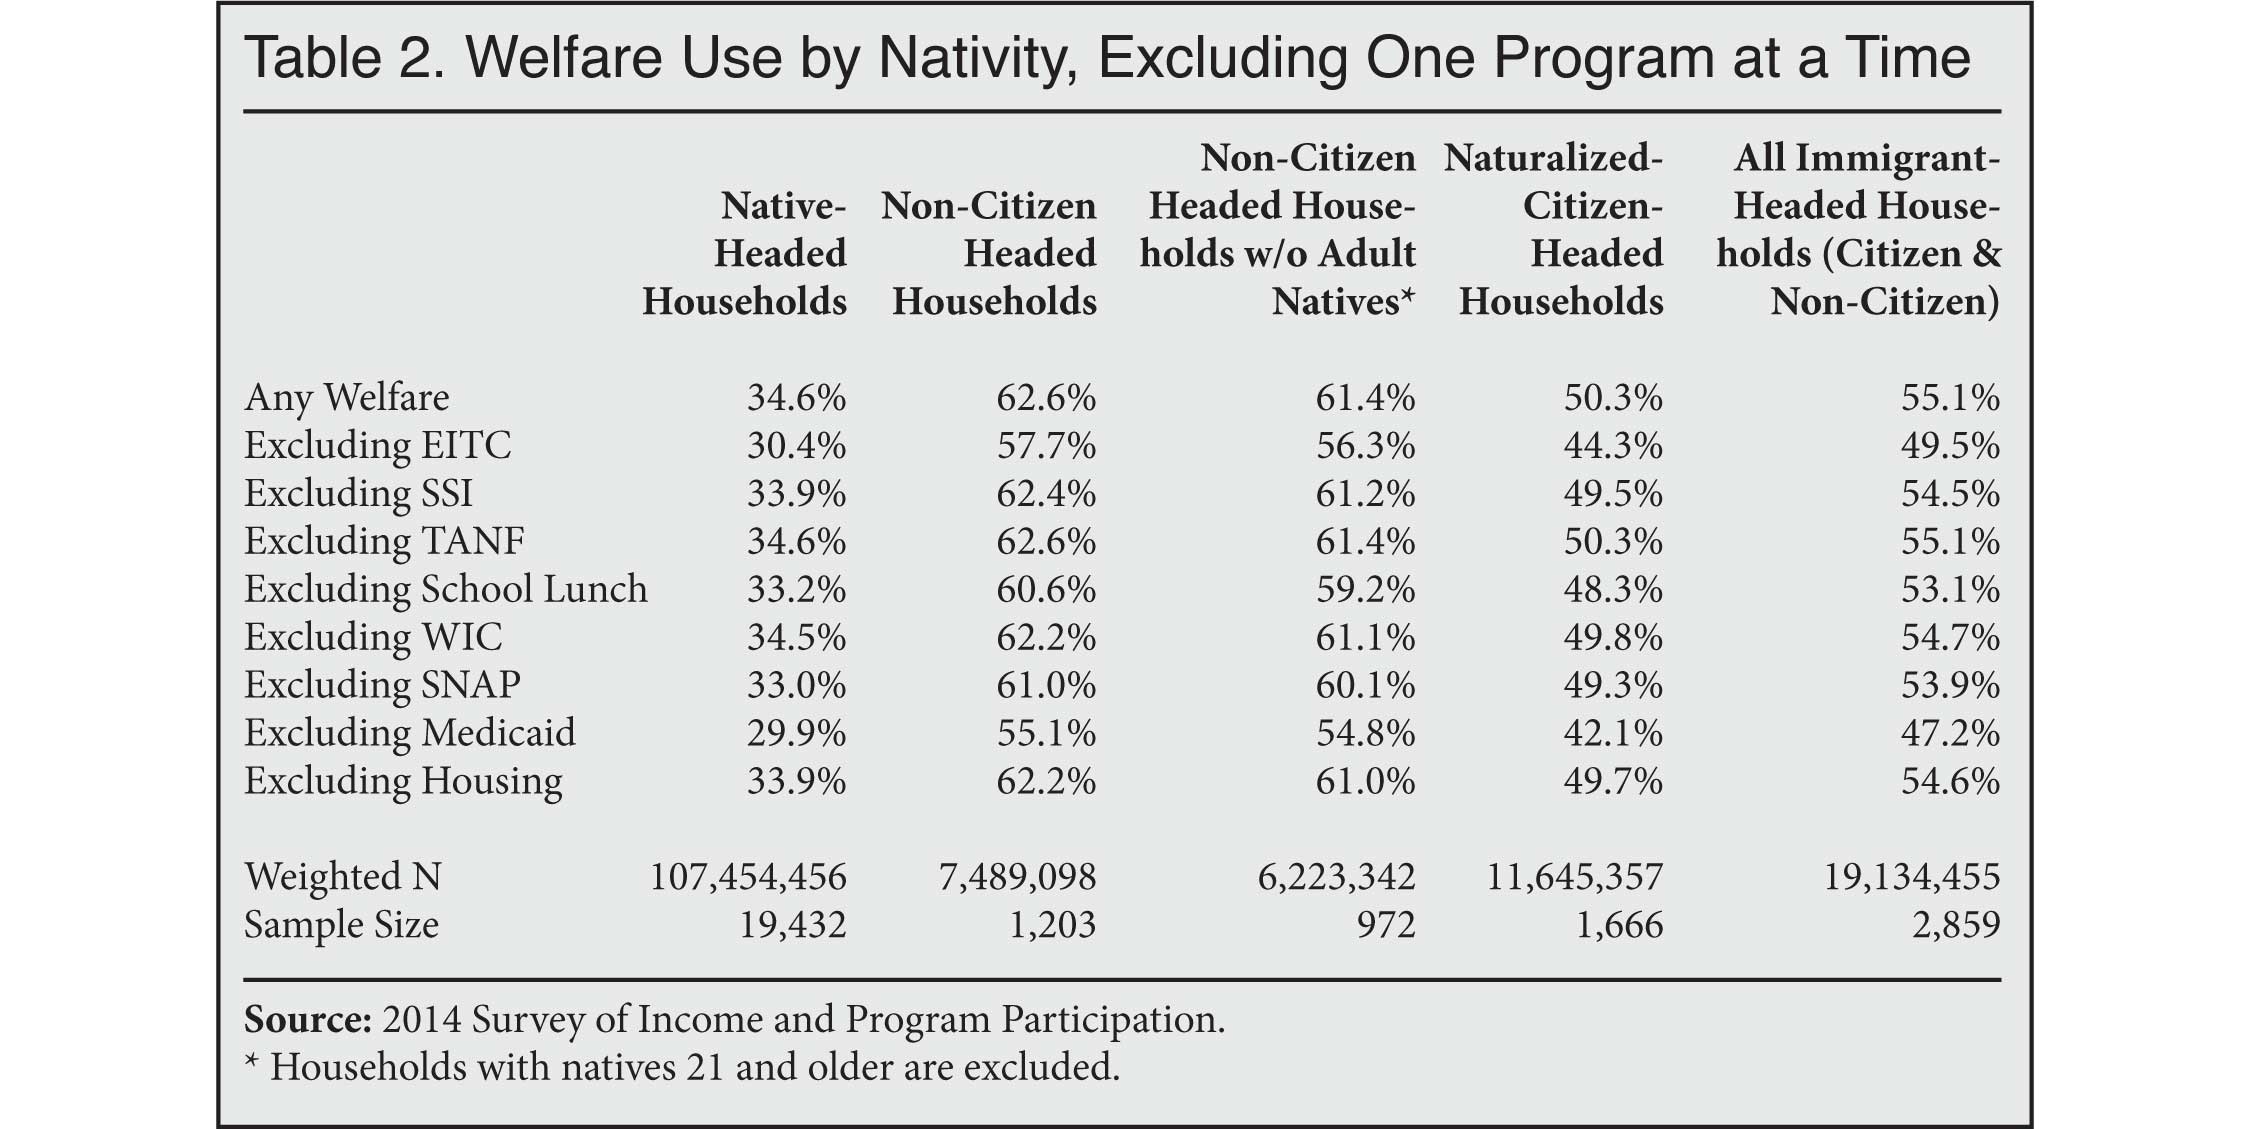 Table: Welfare use by nativity, excluding one program at a time